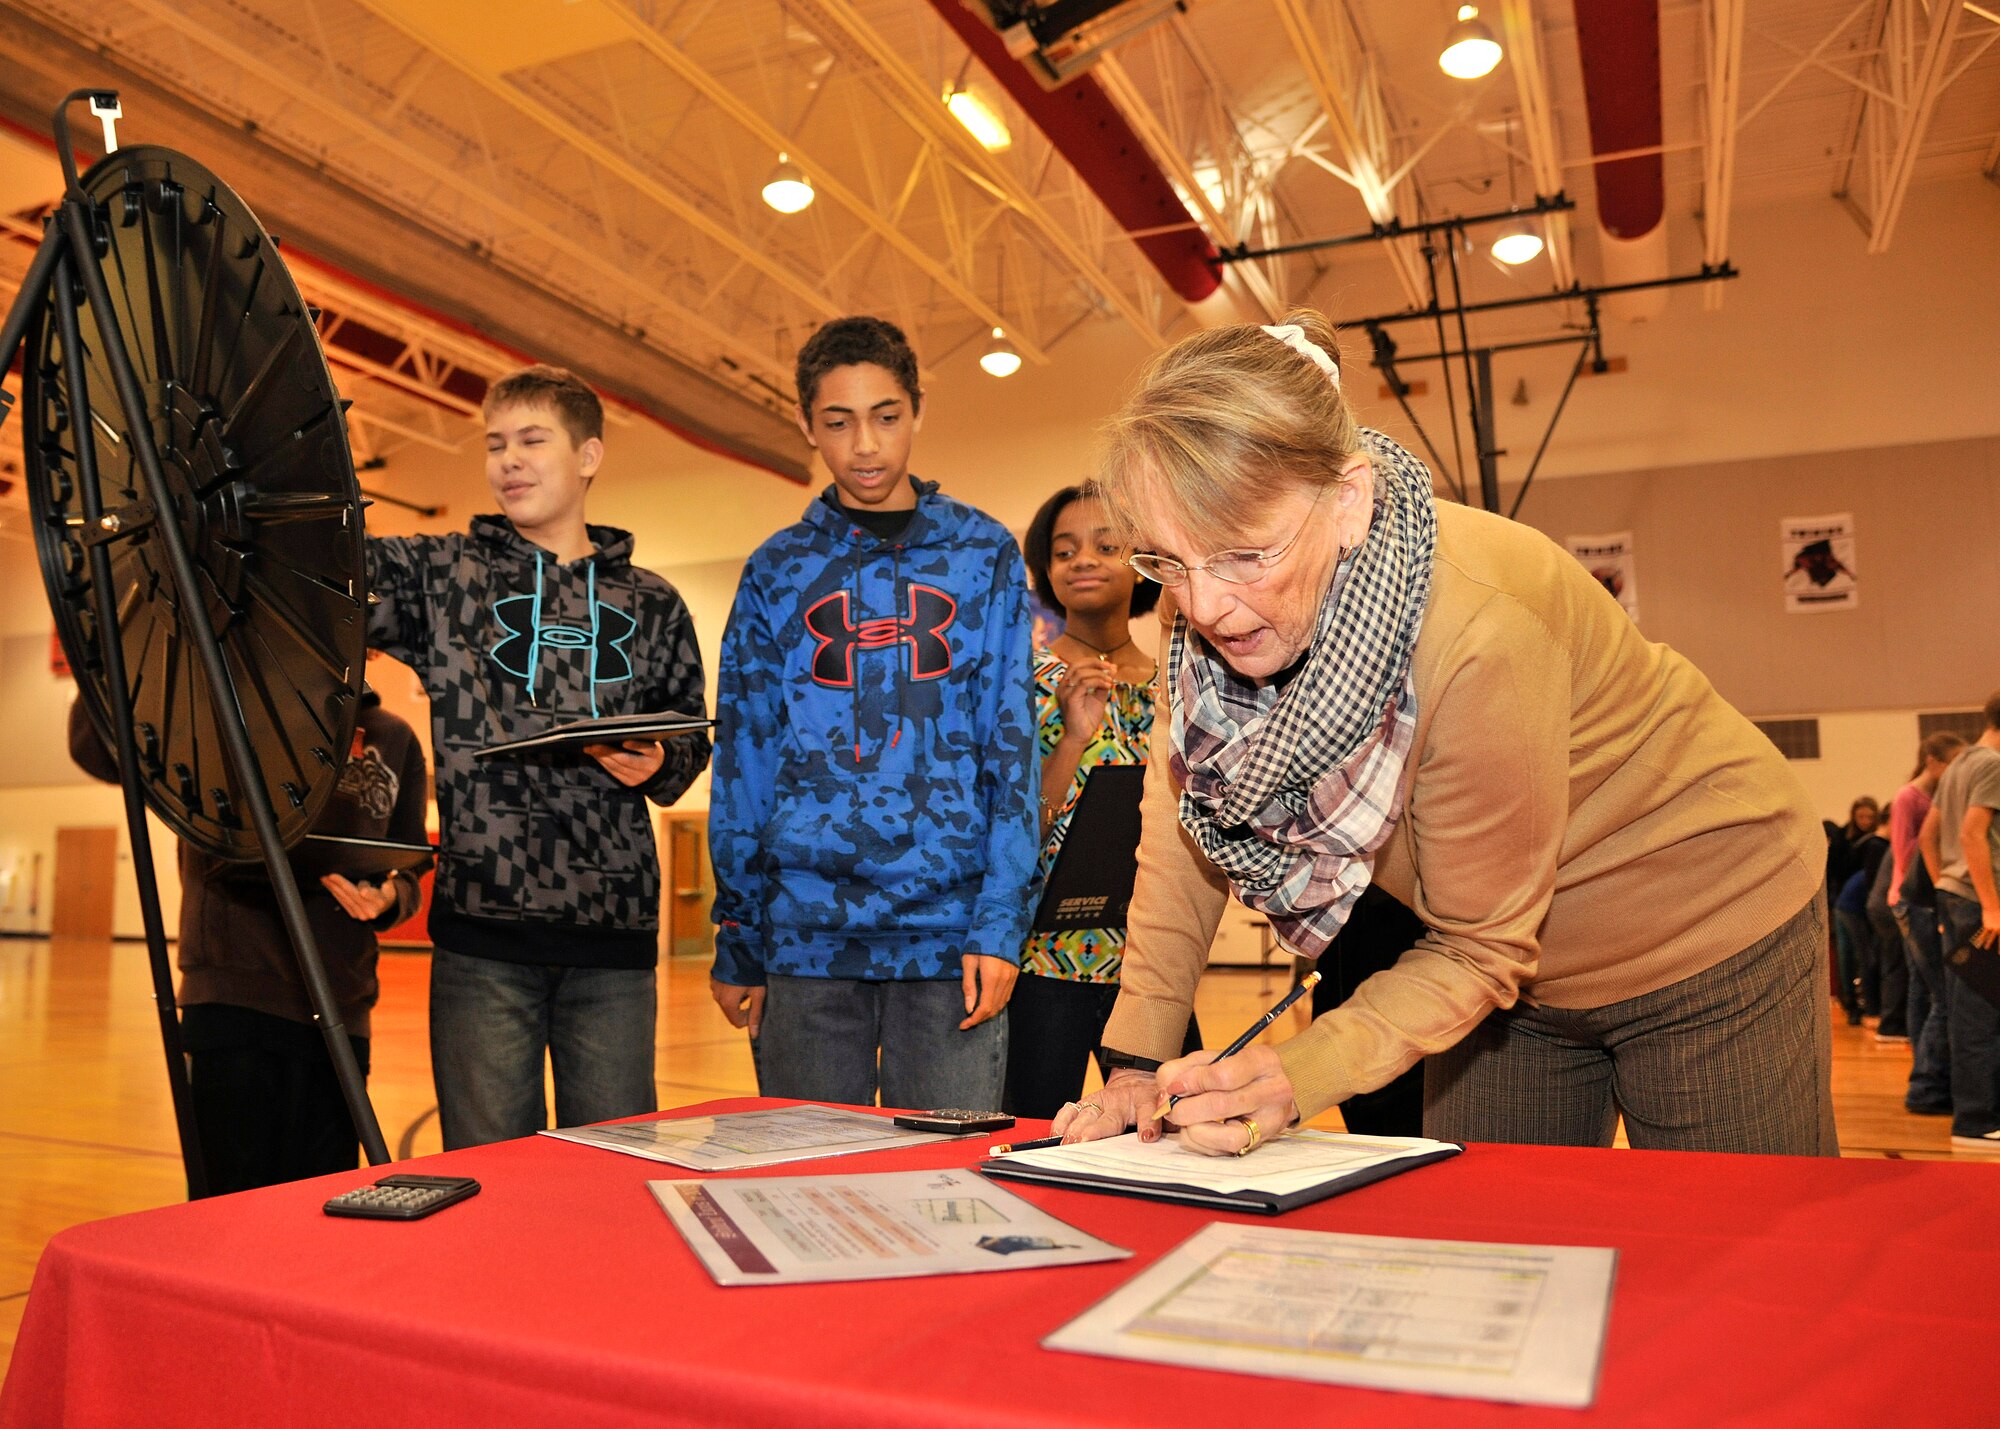 Sue Westerh, Service Credit Union Assistant Vice President for member services, deducts money from a student from Nathan Twining Elementary and Middle School during the Credit Union 4 Reality fair Oct. 16, 2015, on Grand Forks Air Force Base, North Dakota. The concept of the fair is to engage students on smart money decisions. (U.S. Air Force photo by Senior Airman Xavier Navarro/Released)